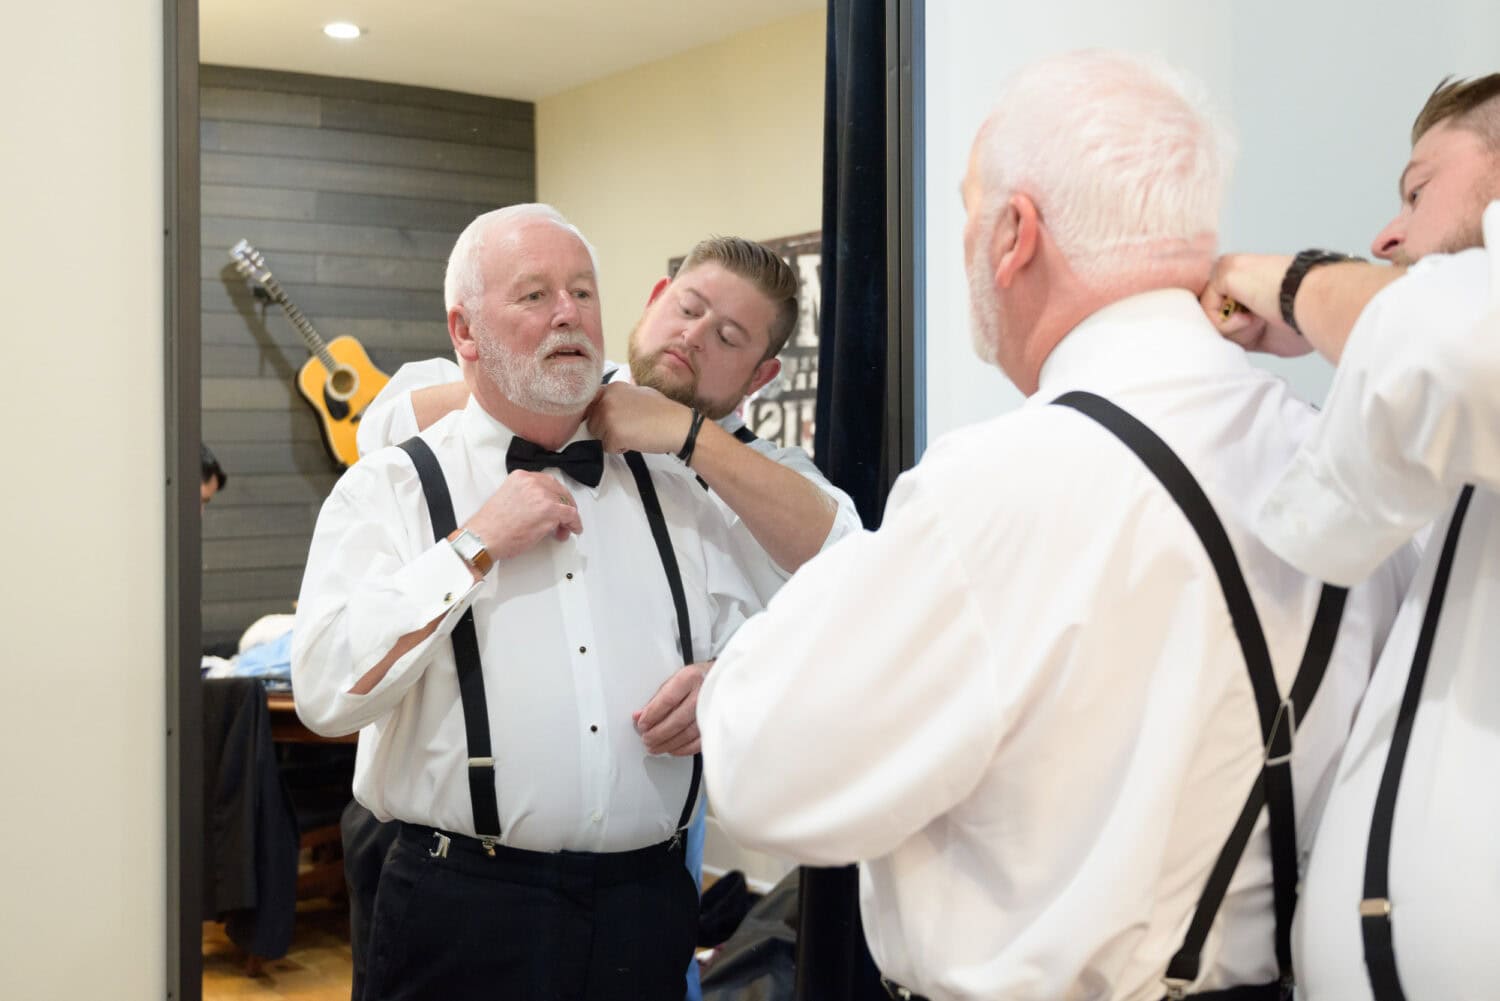 Groom helping dad with tie - by Lizeth Smith - The Venue at White Oaks Farm